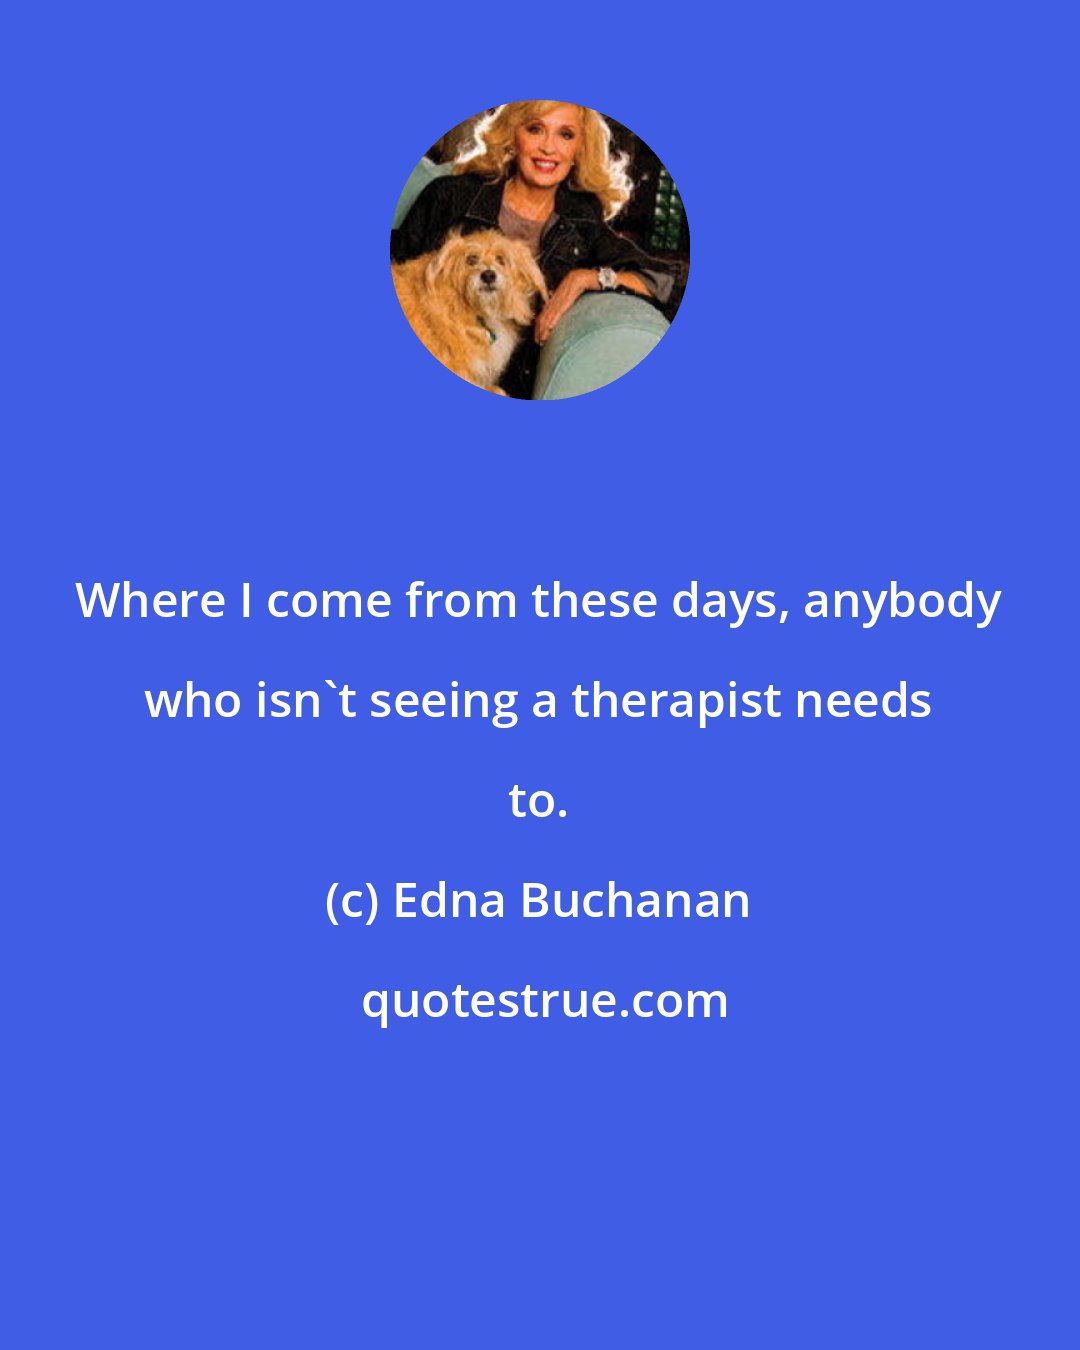 Edna Buchanan: Where I come from these days, anybody who isn't seeing a therapist needs to.